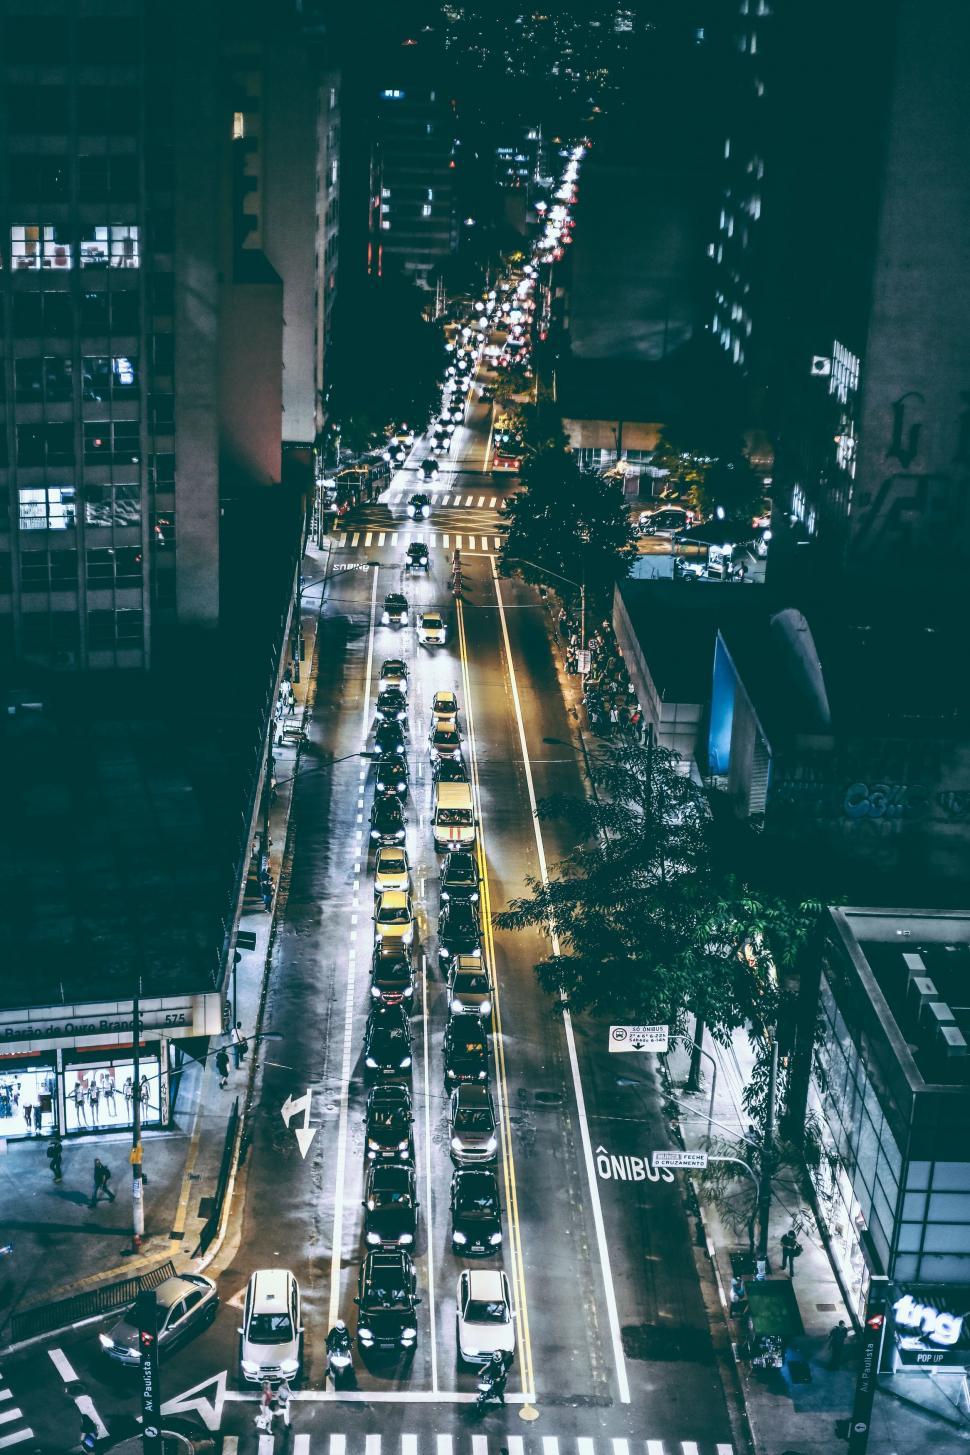 Free Image of Light Trails of cars on road - Night View  